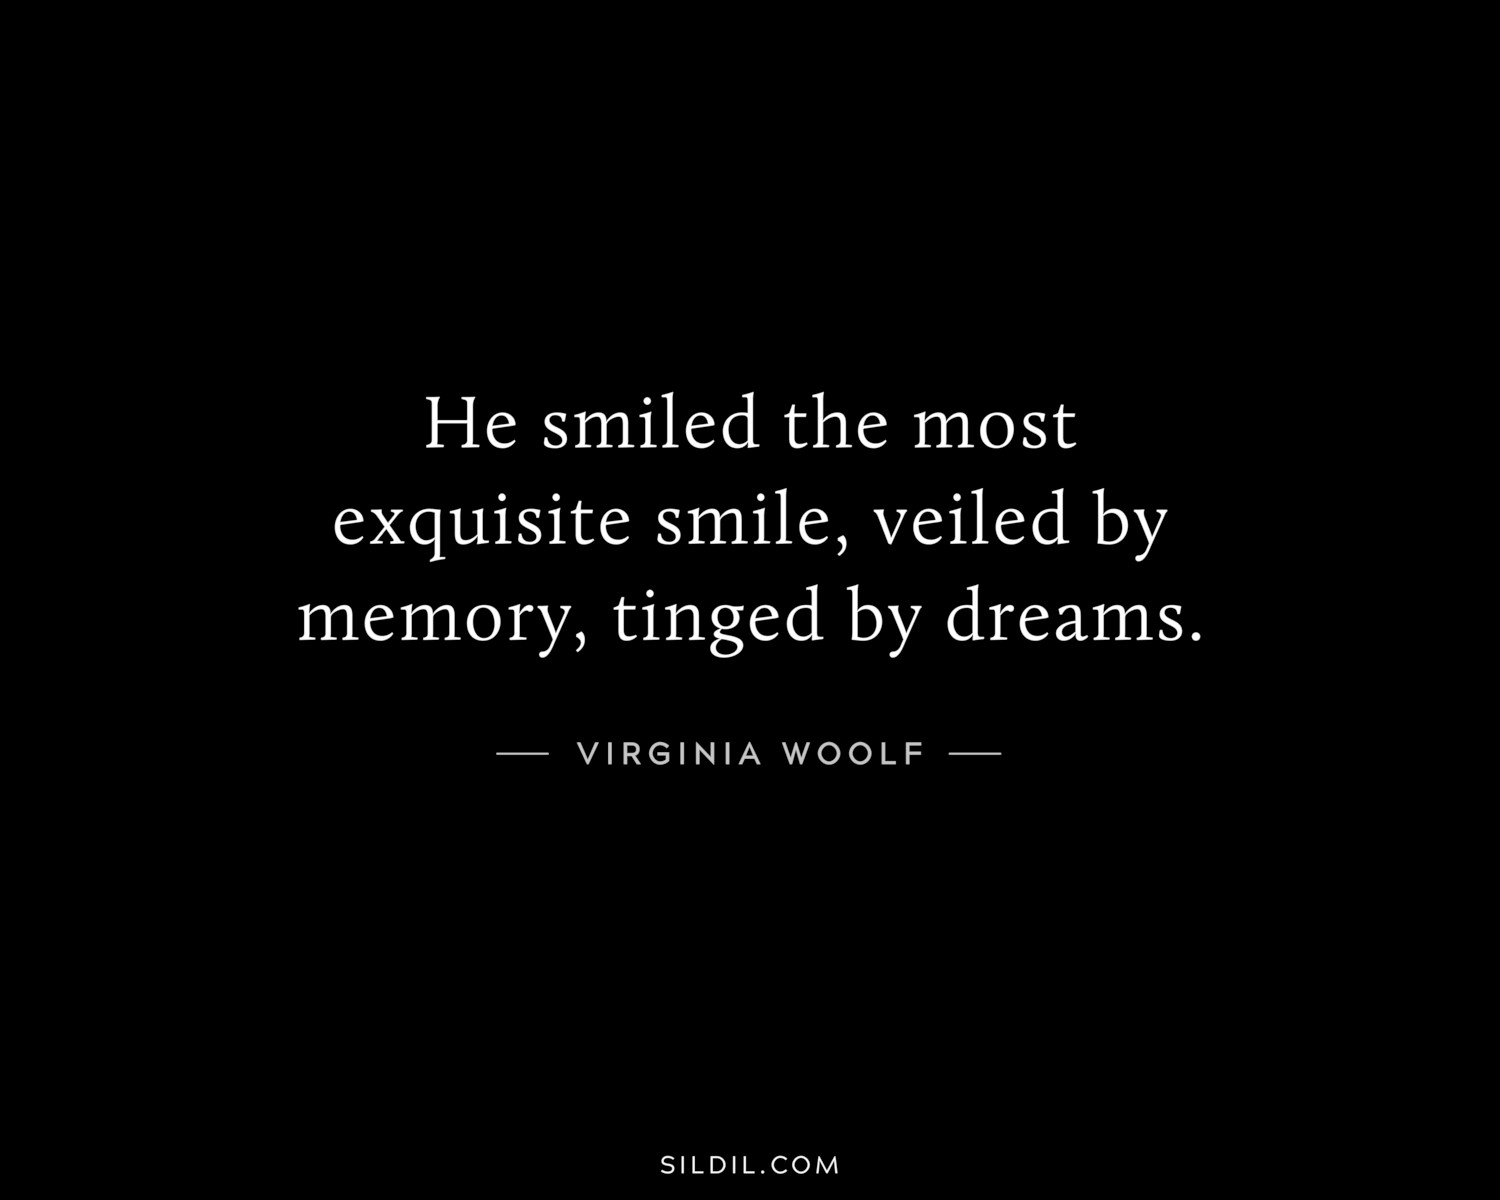 He smiled the most exquisite smile, veiled by memory, tinged by dreams.